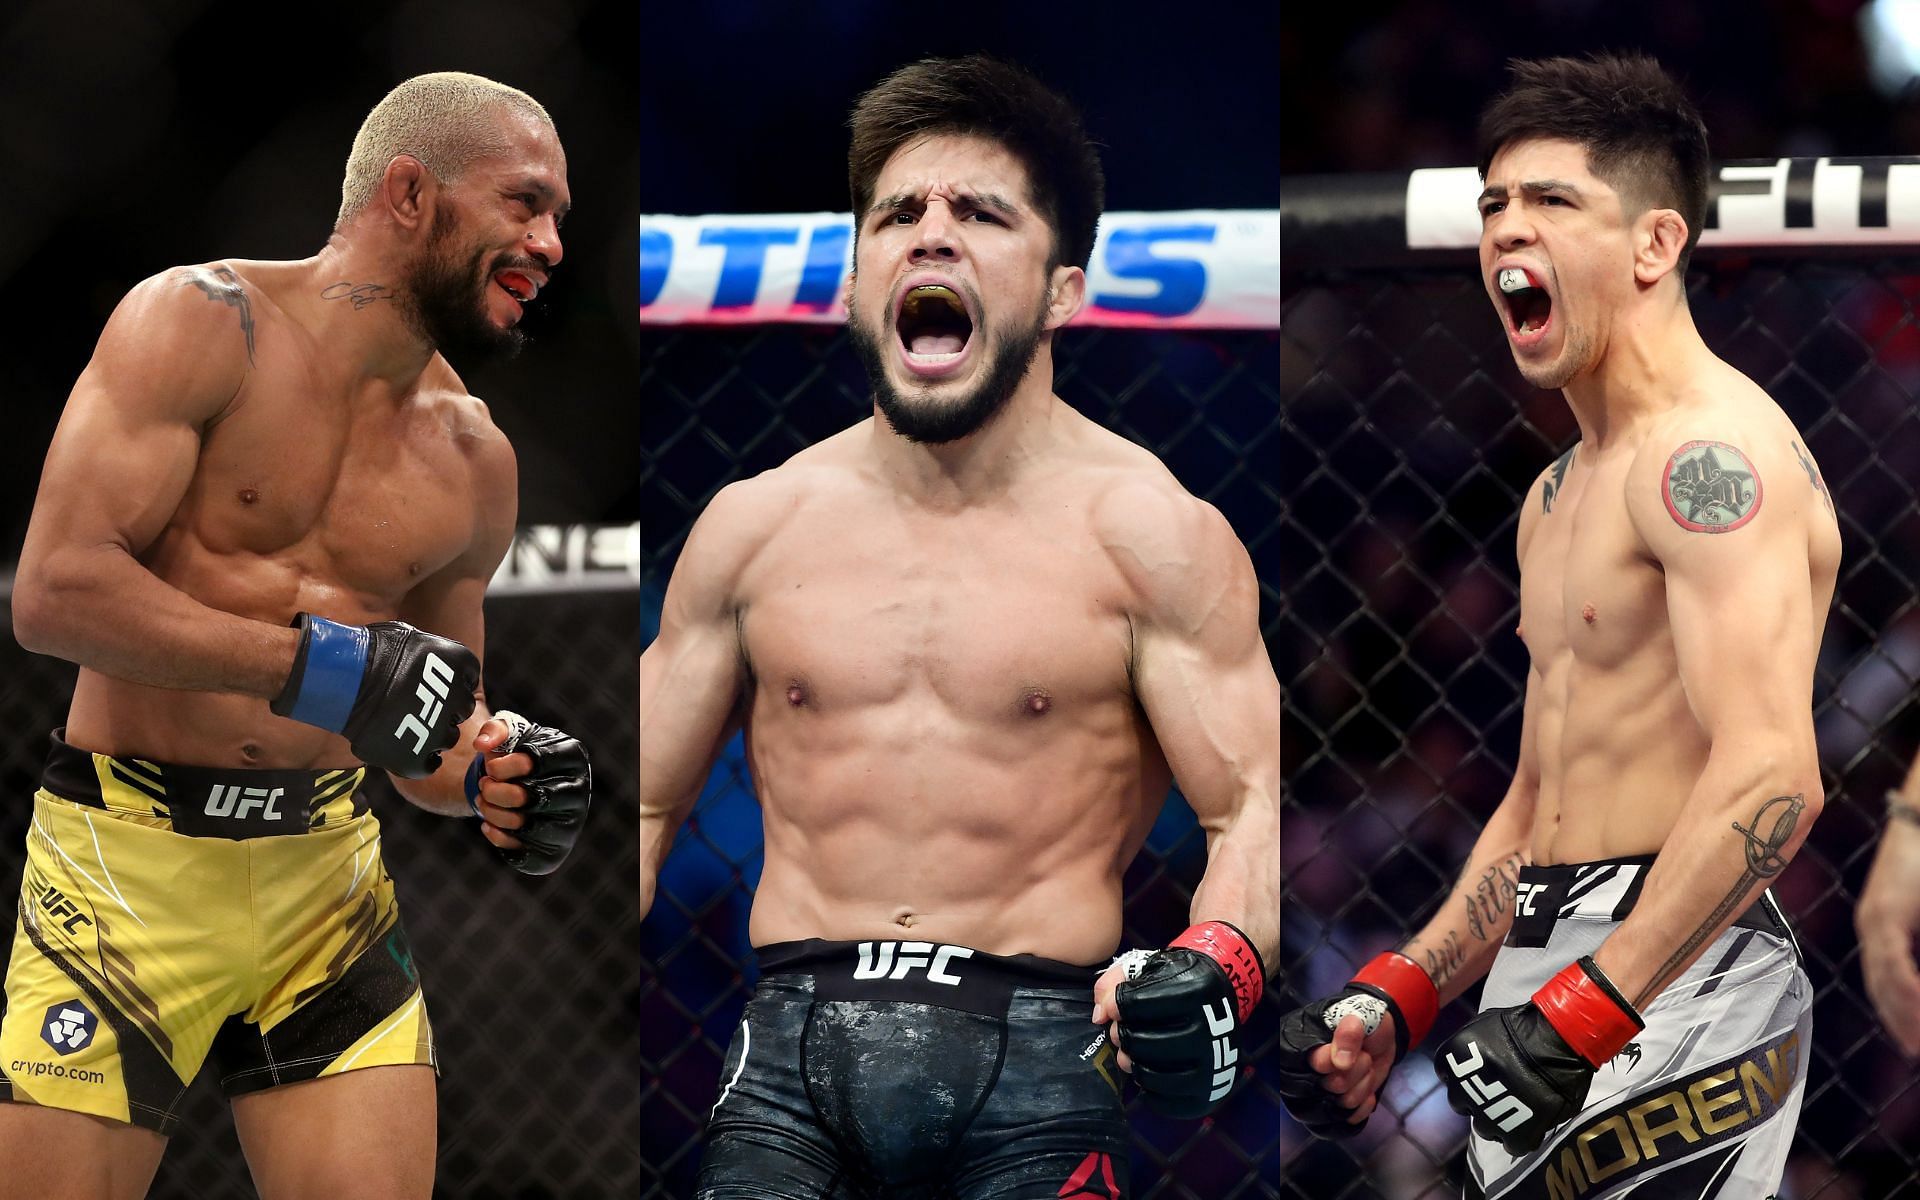 From left to right: Deiveson Figueiredo, Henry Cejudo, and Brandon Moreno